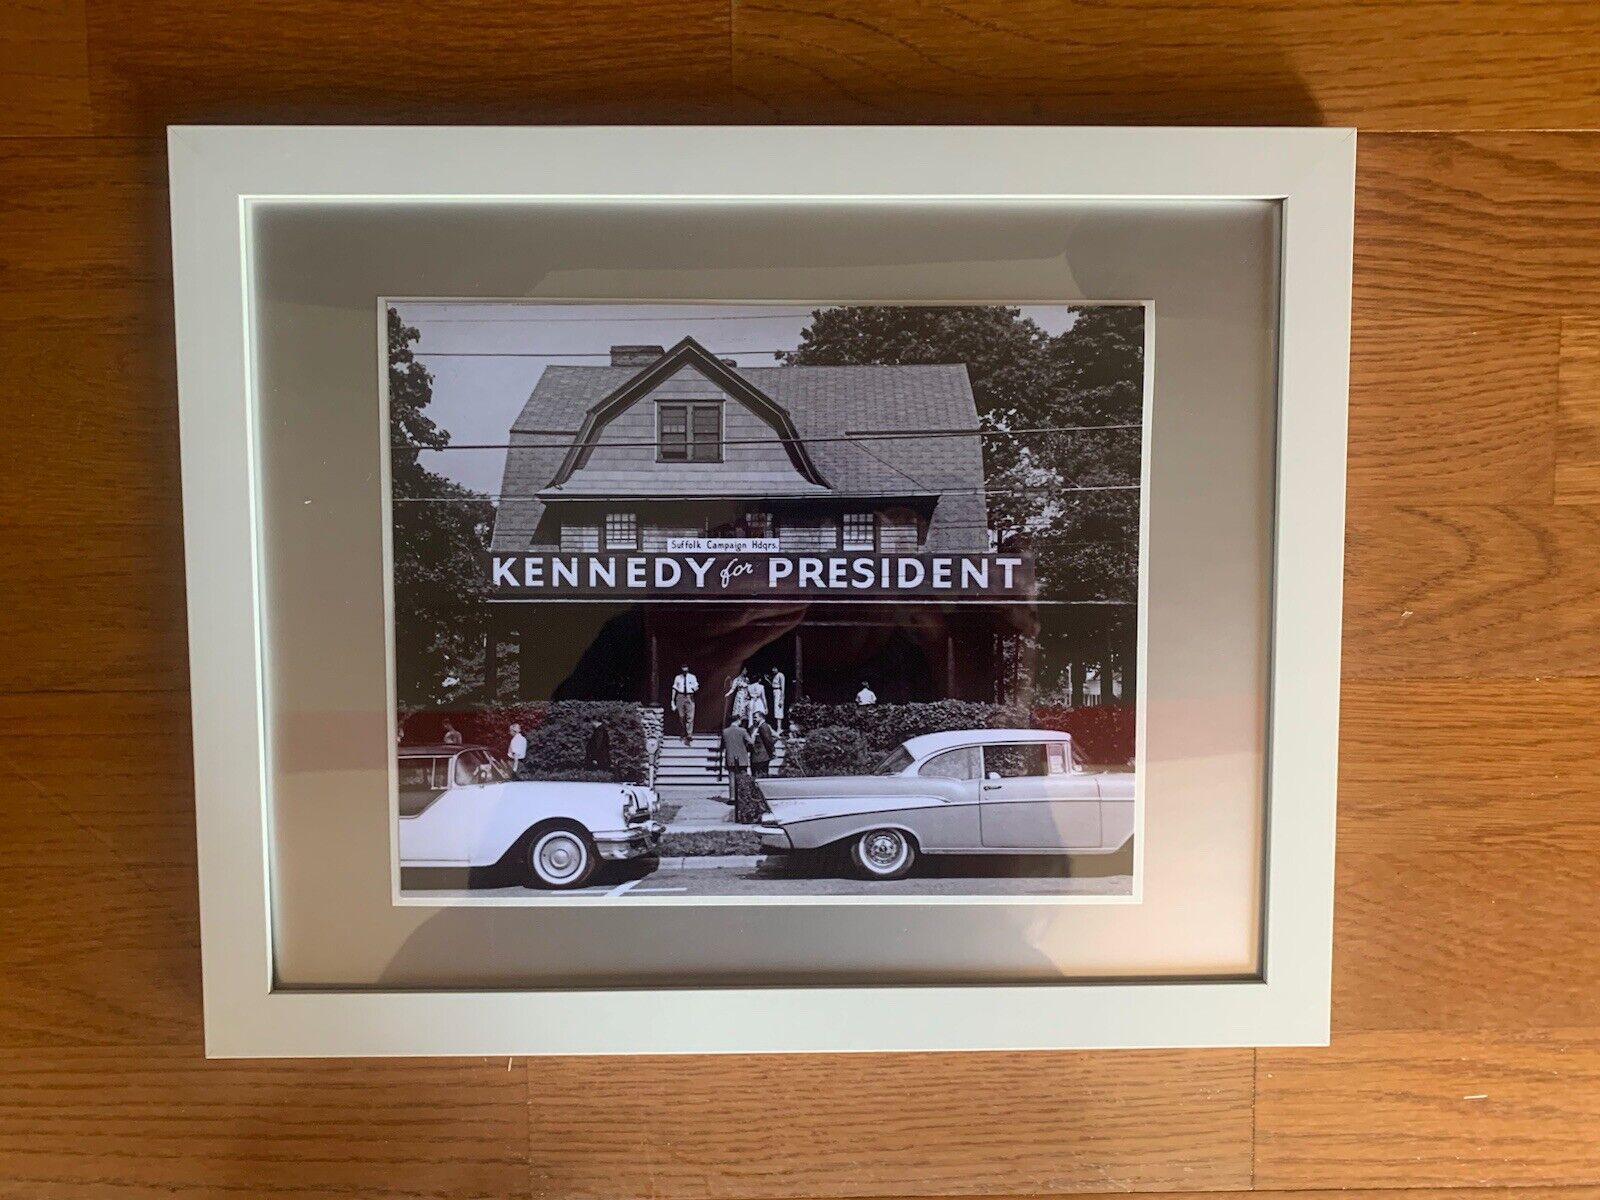 A Framed Photo Print Of “Kennedy For President”